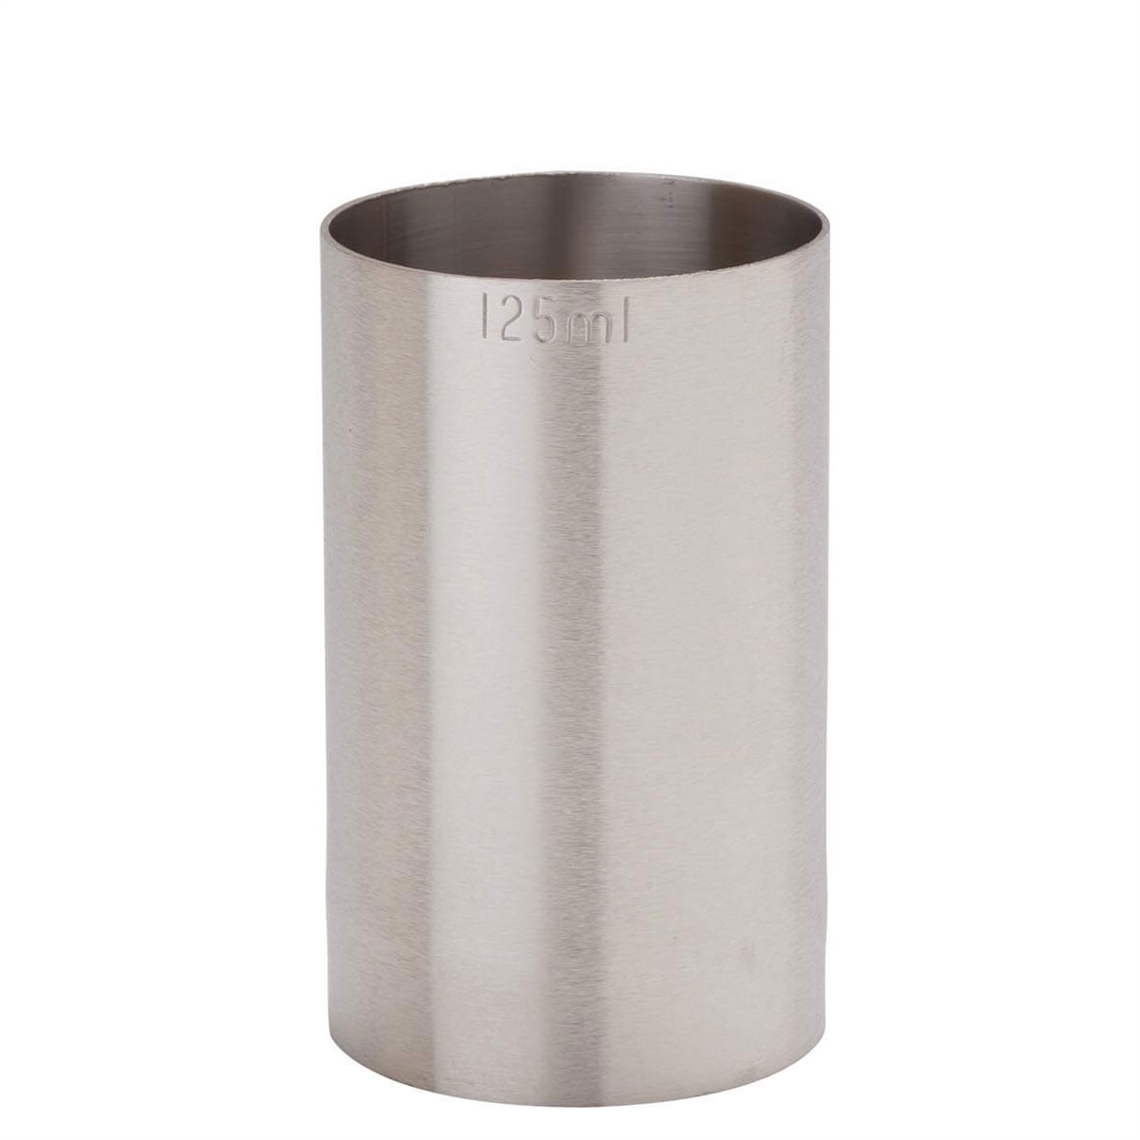 Professional Stainless Steel Thimble Bar Wine Measure 125ml